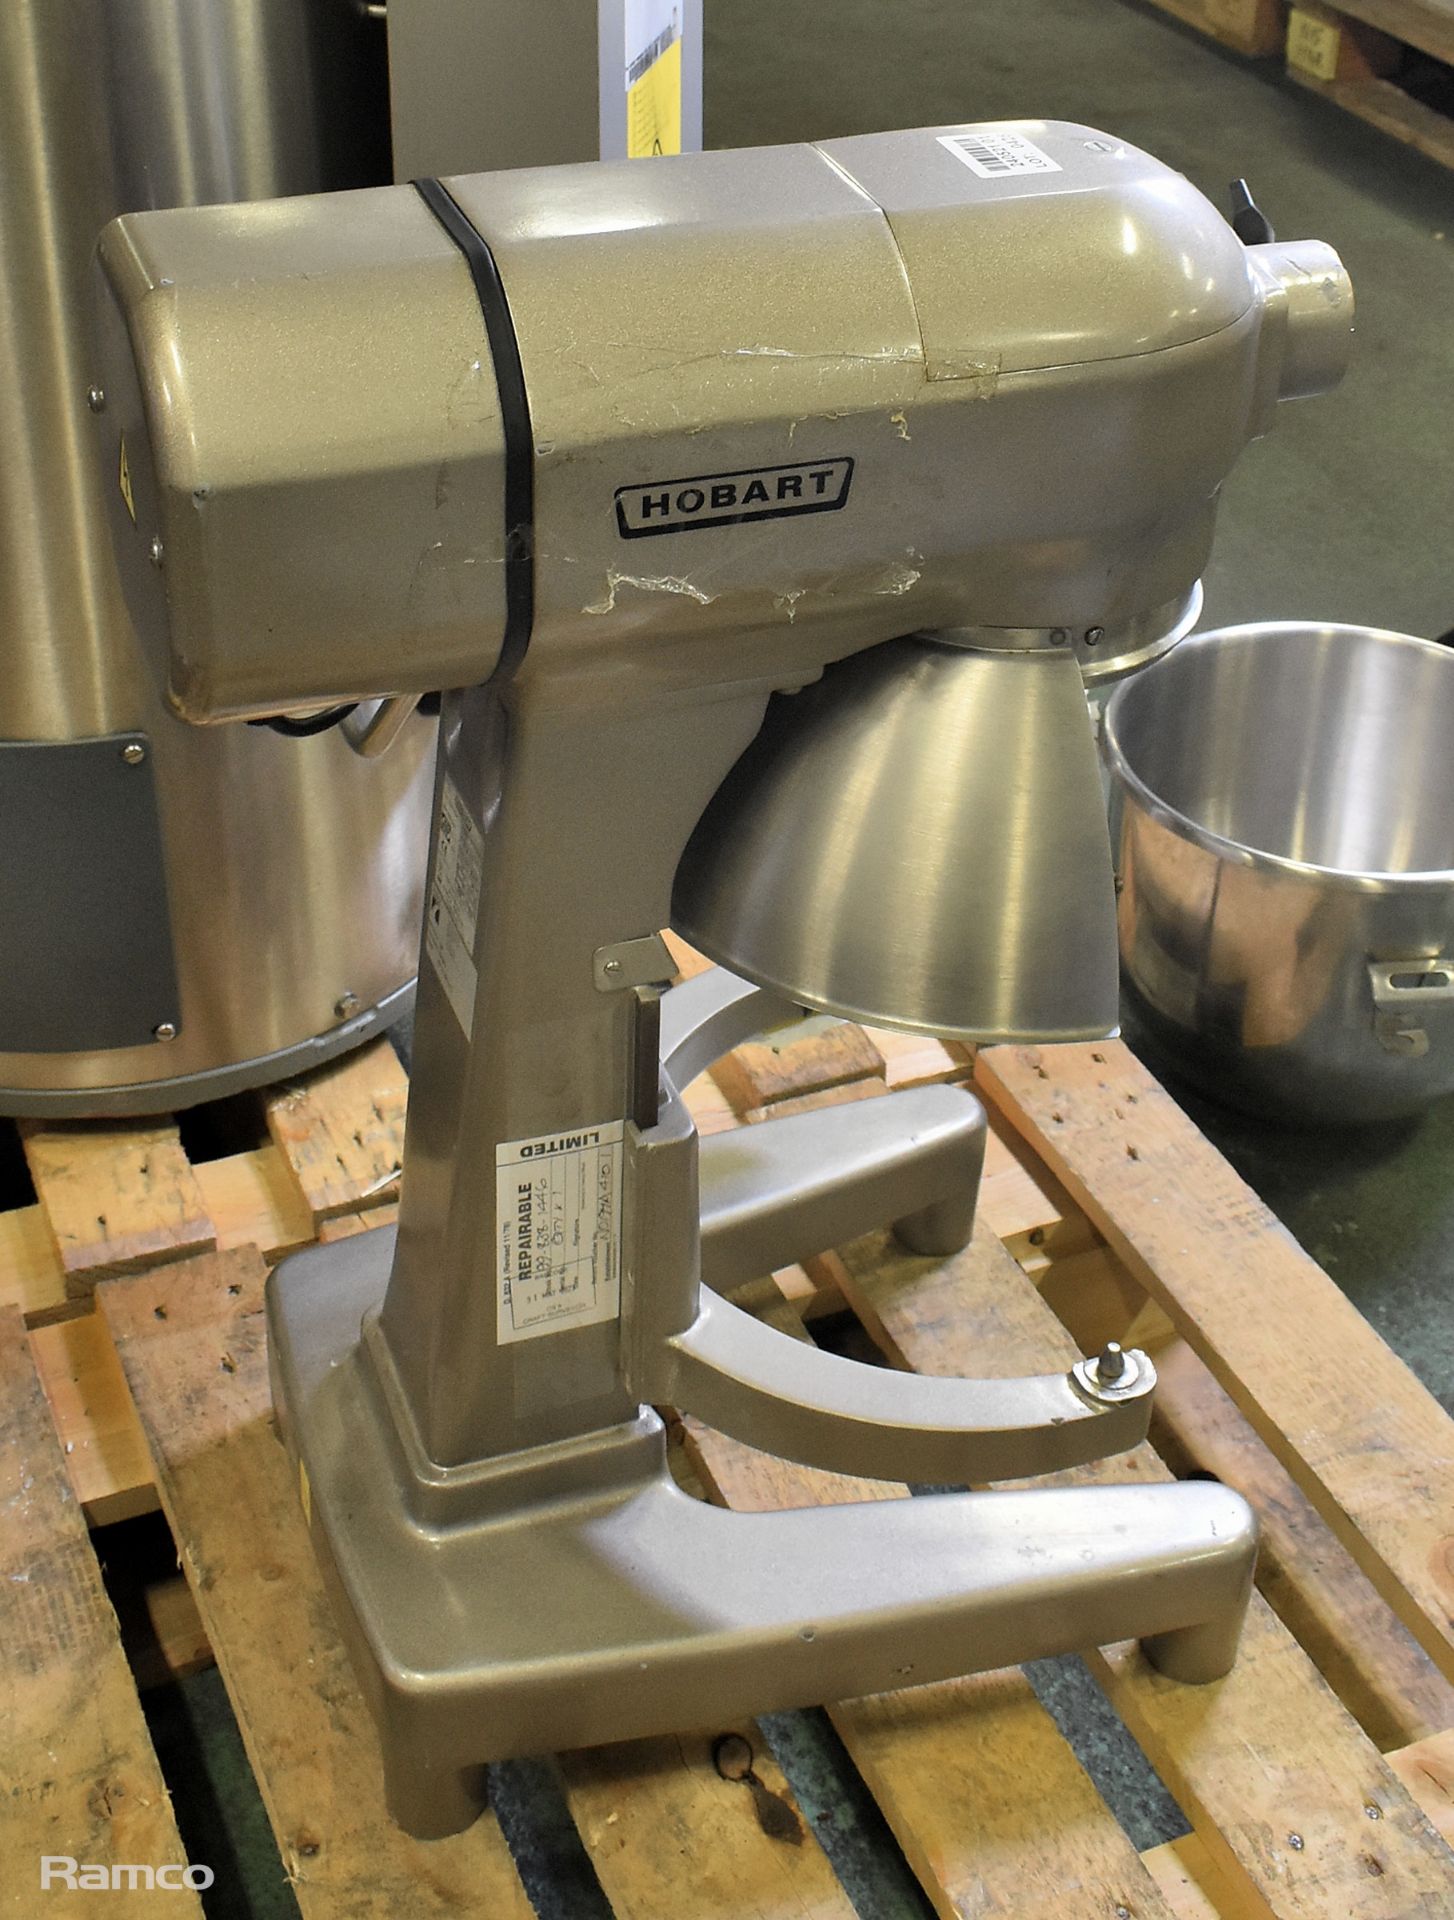 Hobart A200N mixer with bowl and attachments - 440V - 60Hz - W 450 x D 600 x H 800mm - Image 6 of 9